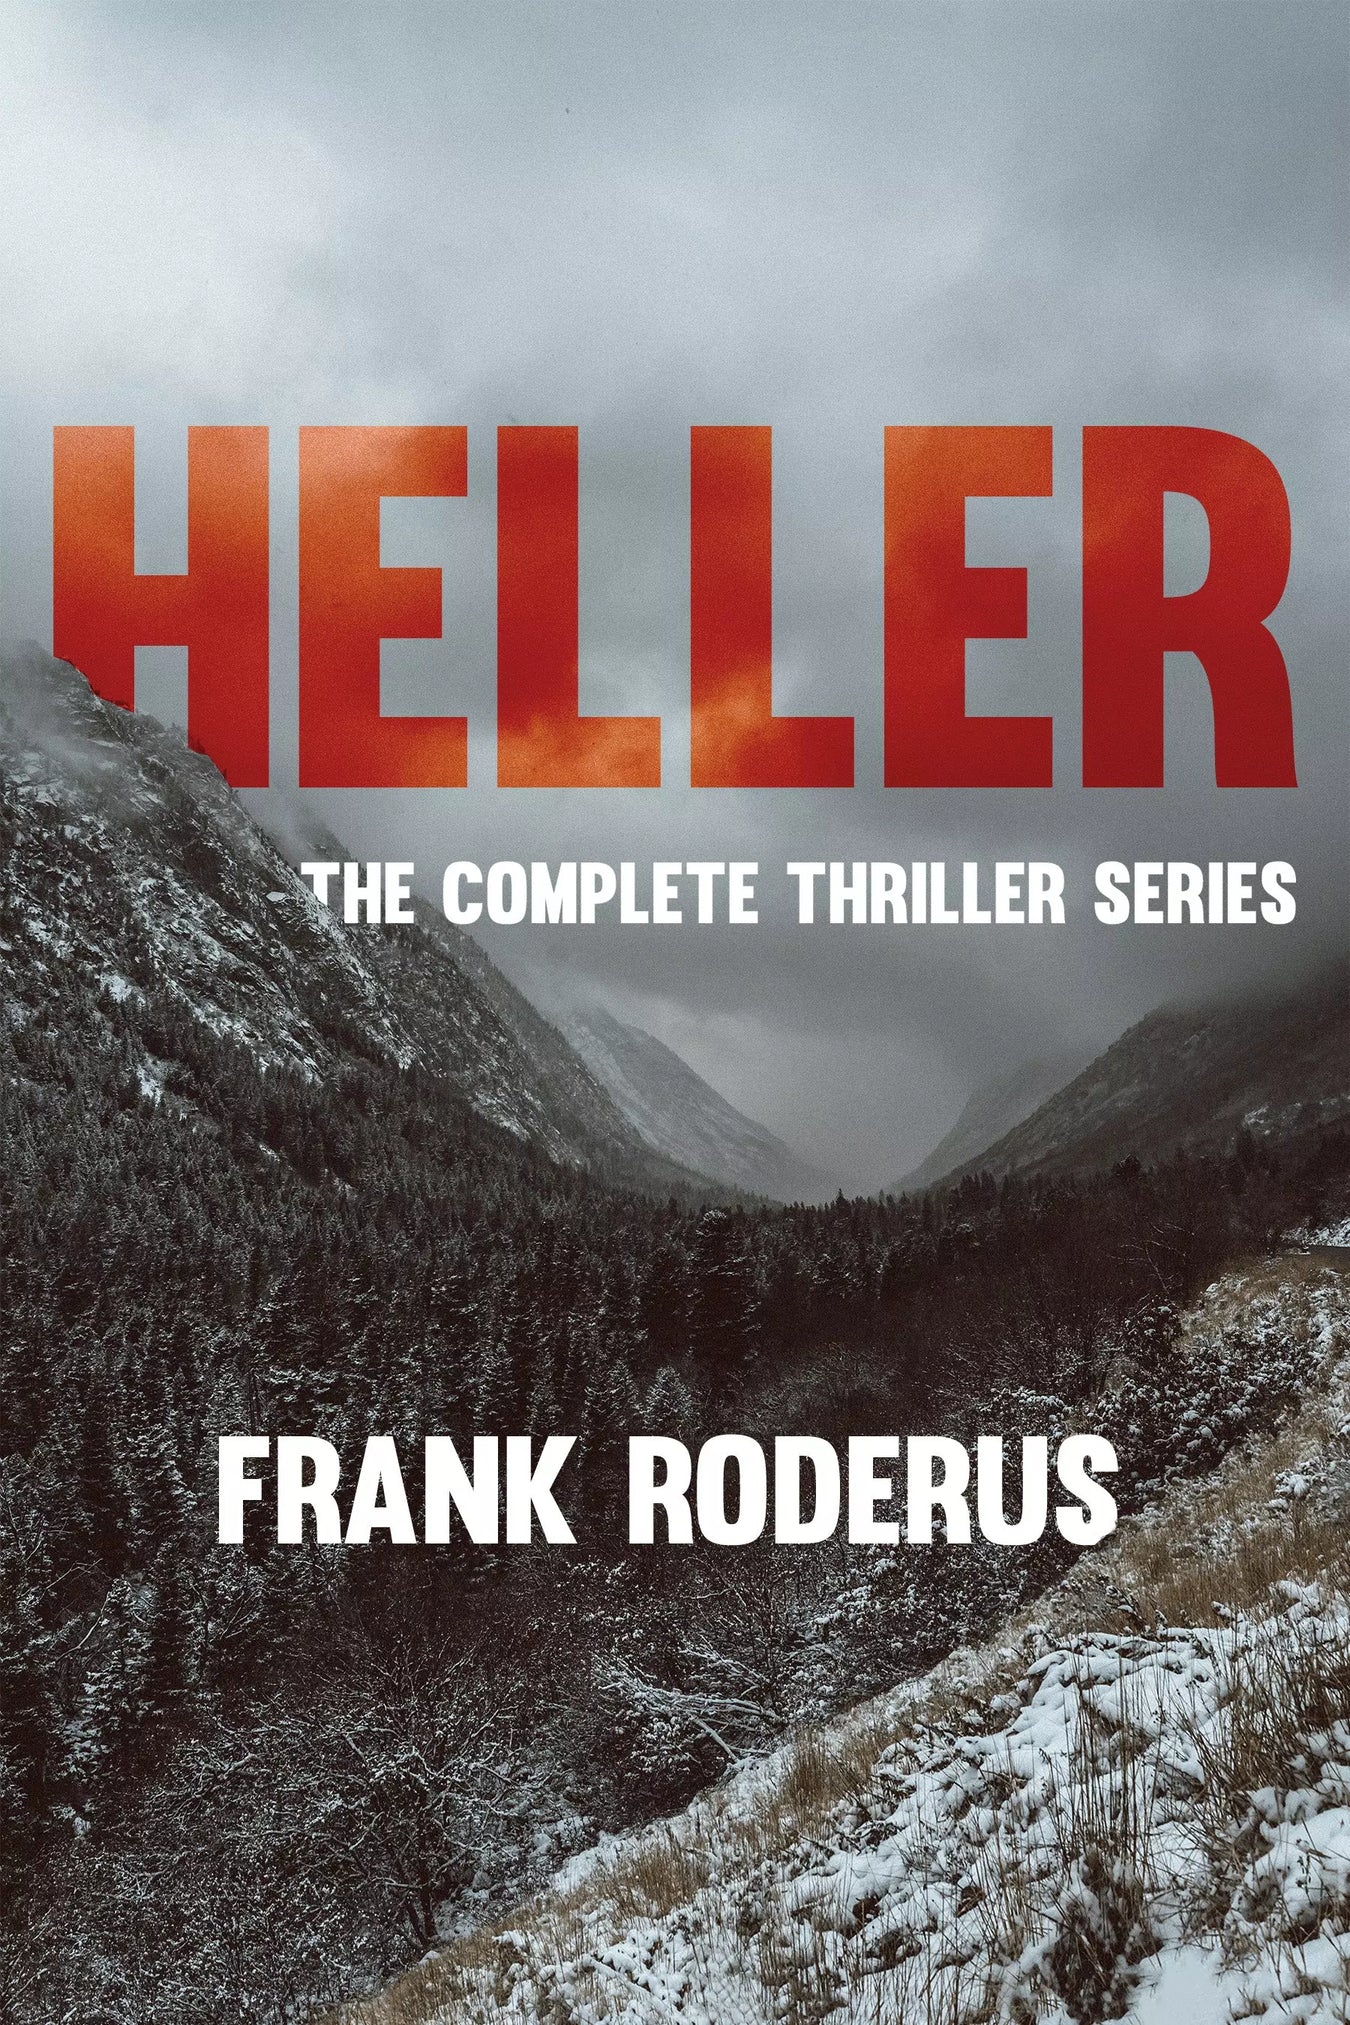 The Heller Thrillers